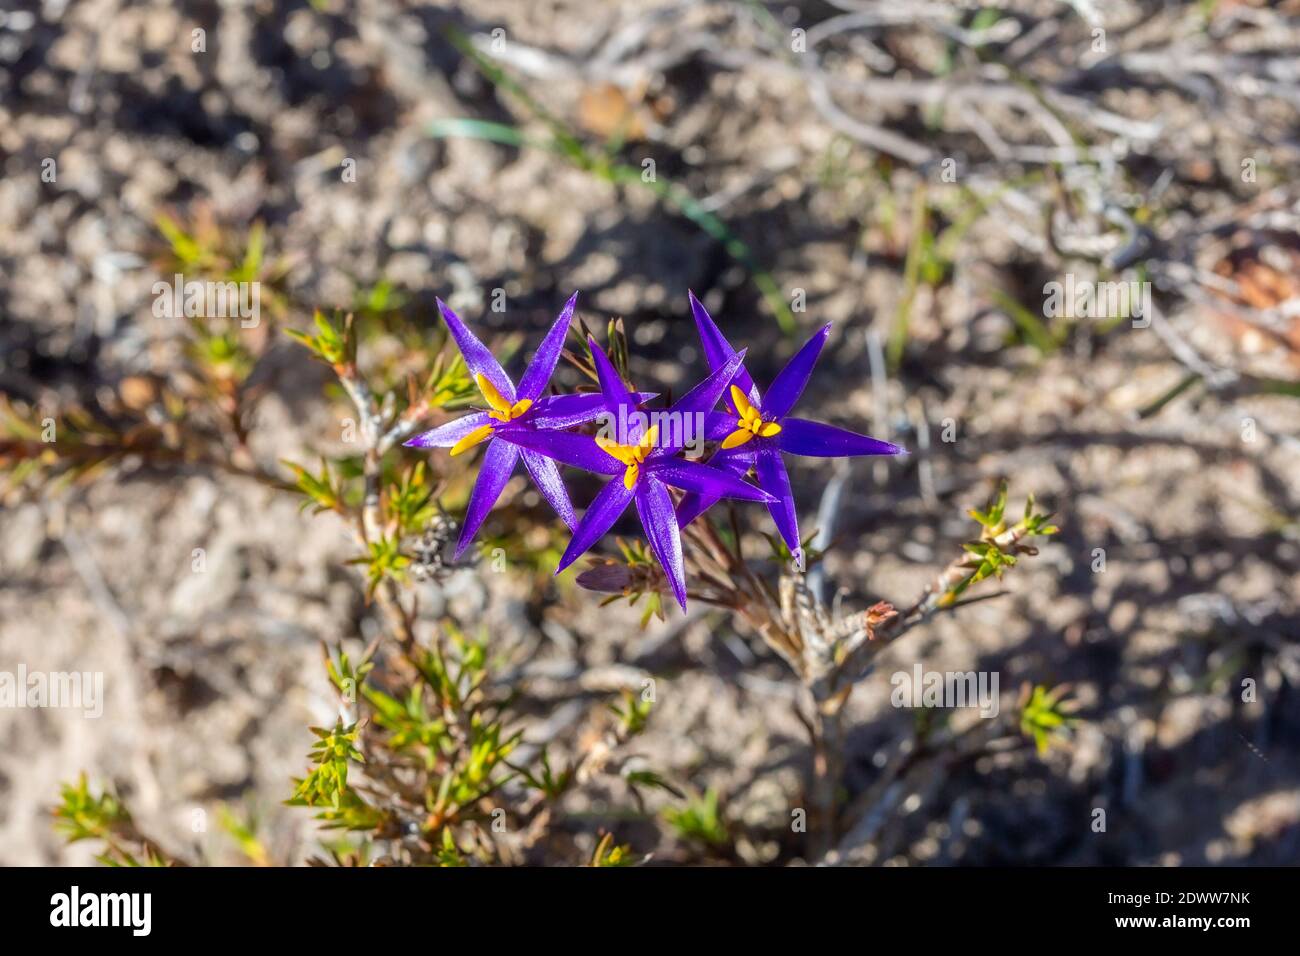 nice flowers of the blue tinsel lily Calectasia grandiflora found in the Strinlinge Range National Park in Western Australia Stock Photo